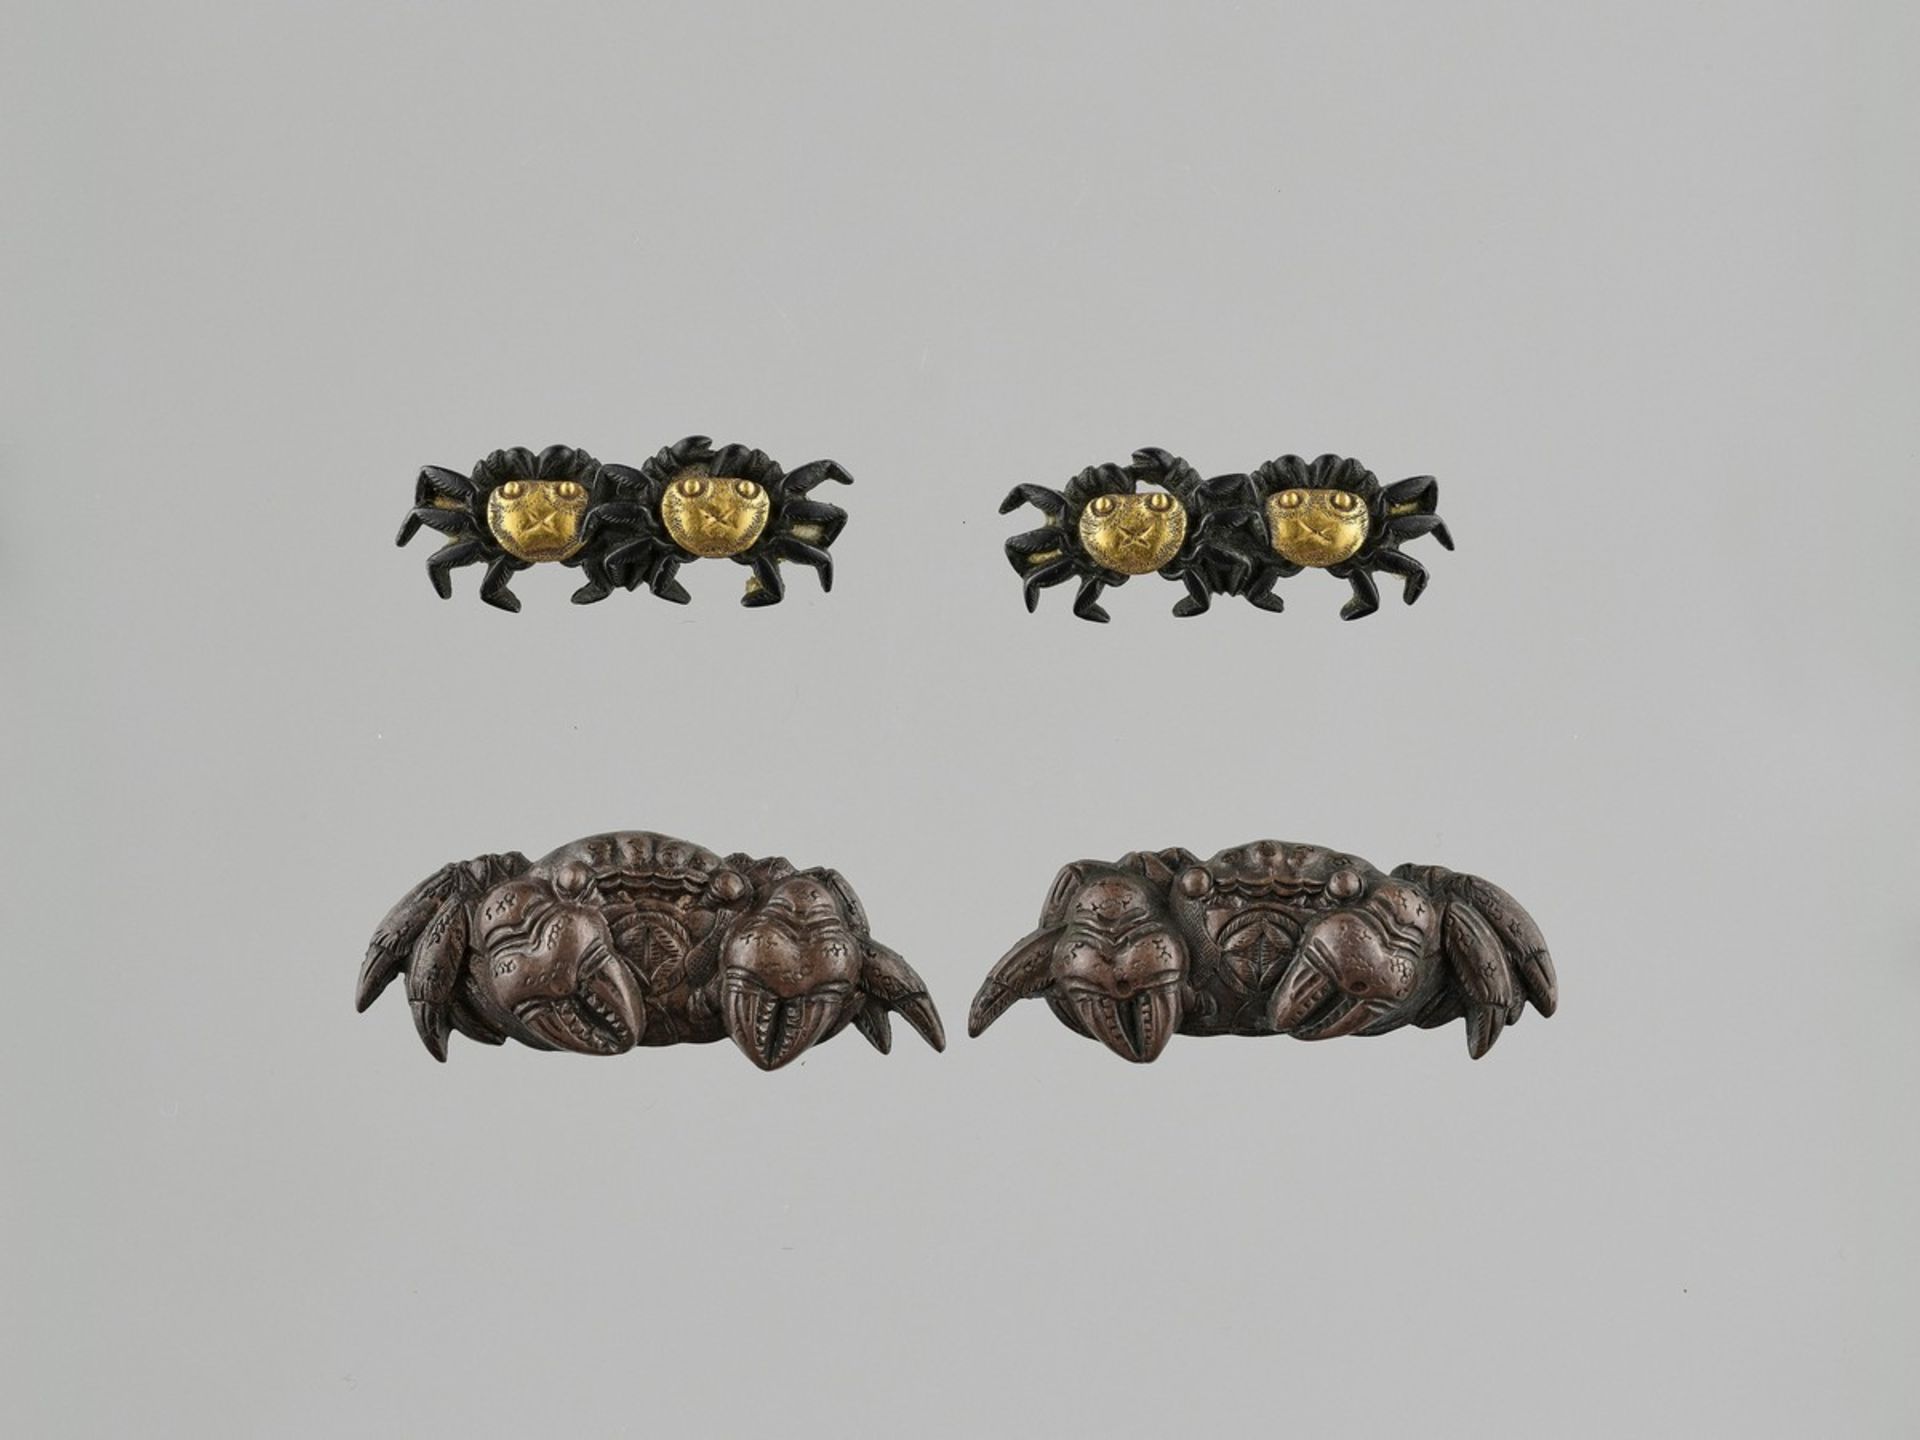 TWO MATCHING PAIRS OF MENUKI DEPICTING CRABS Japan, 19th century, Edo period (1615-1868)The first